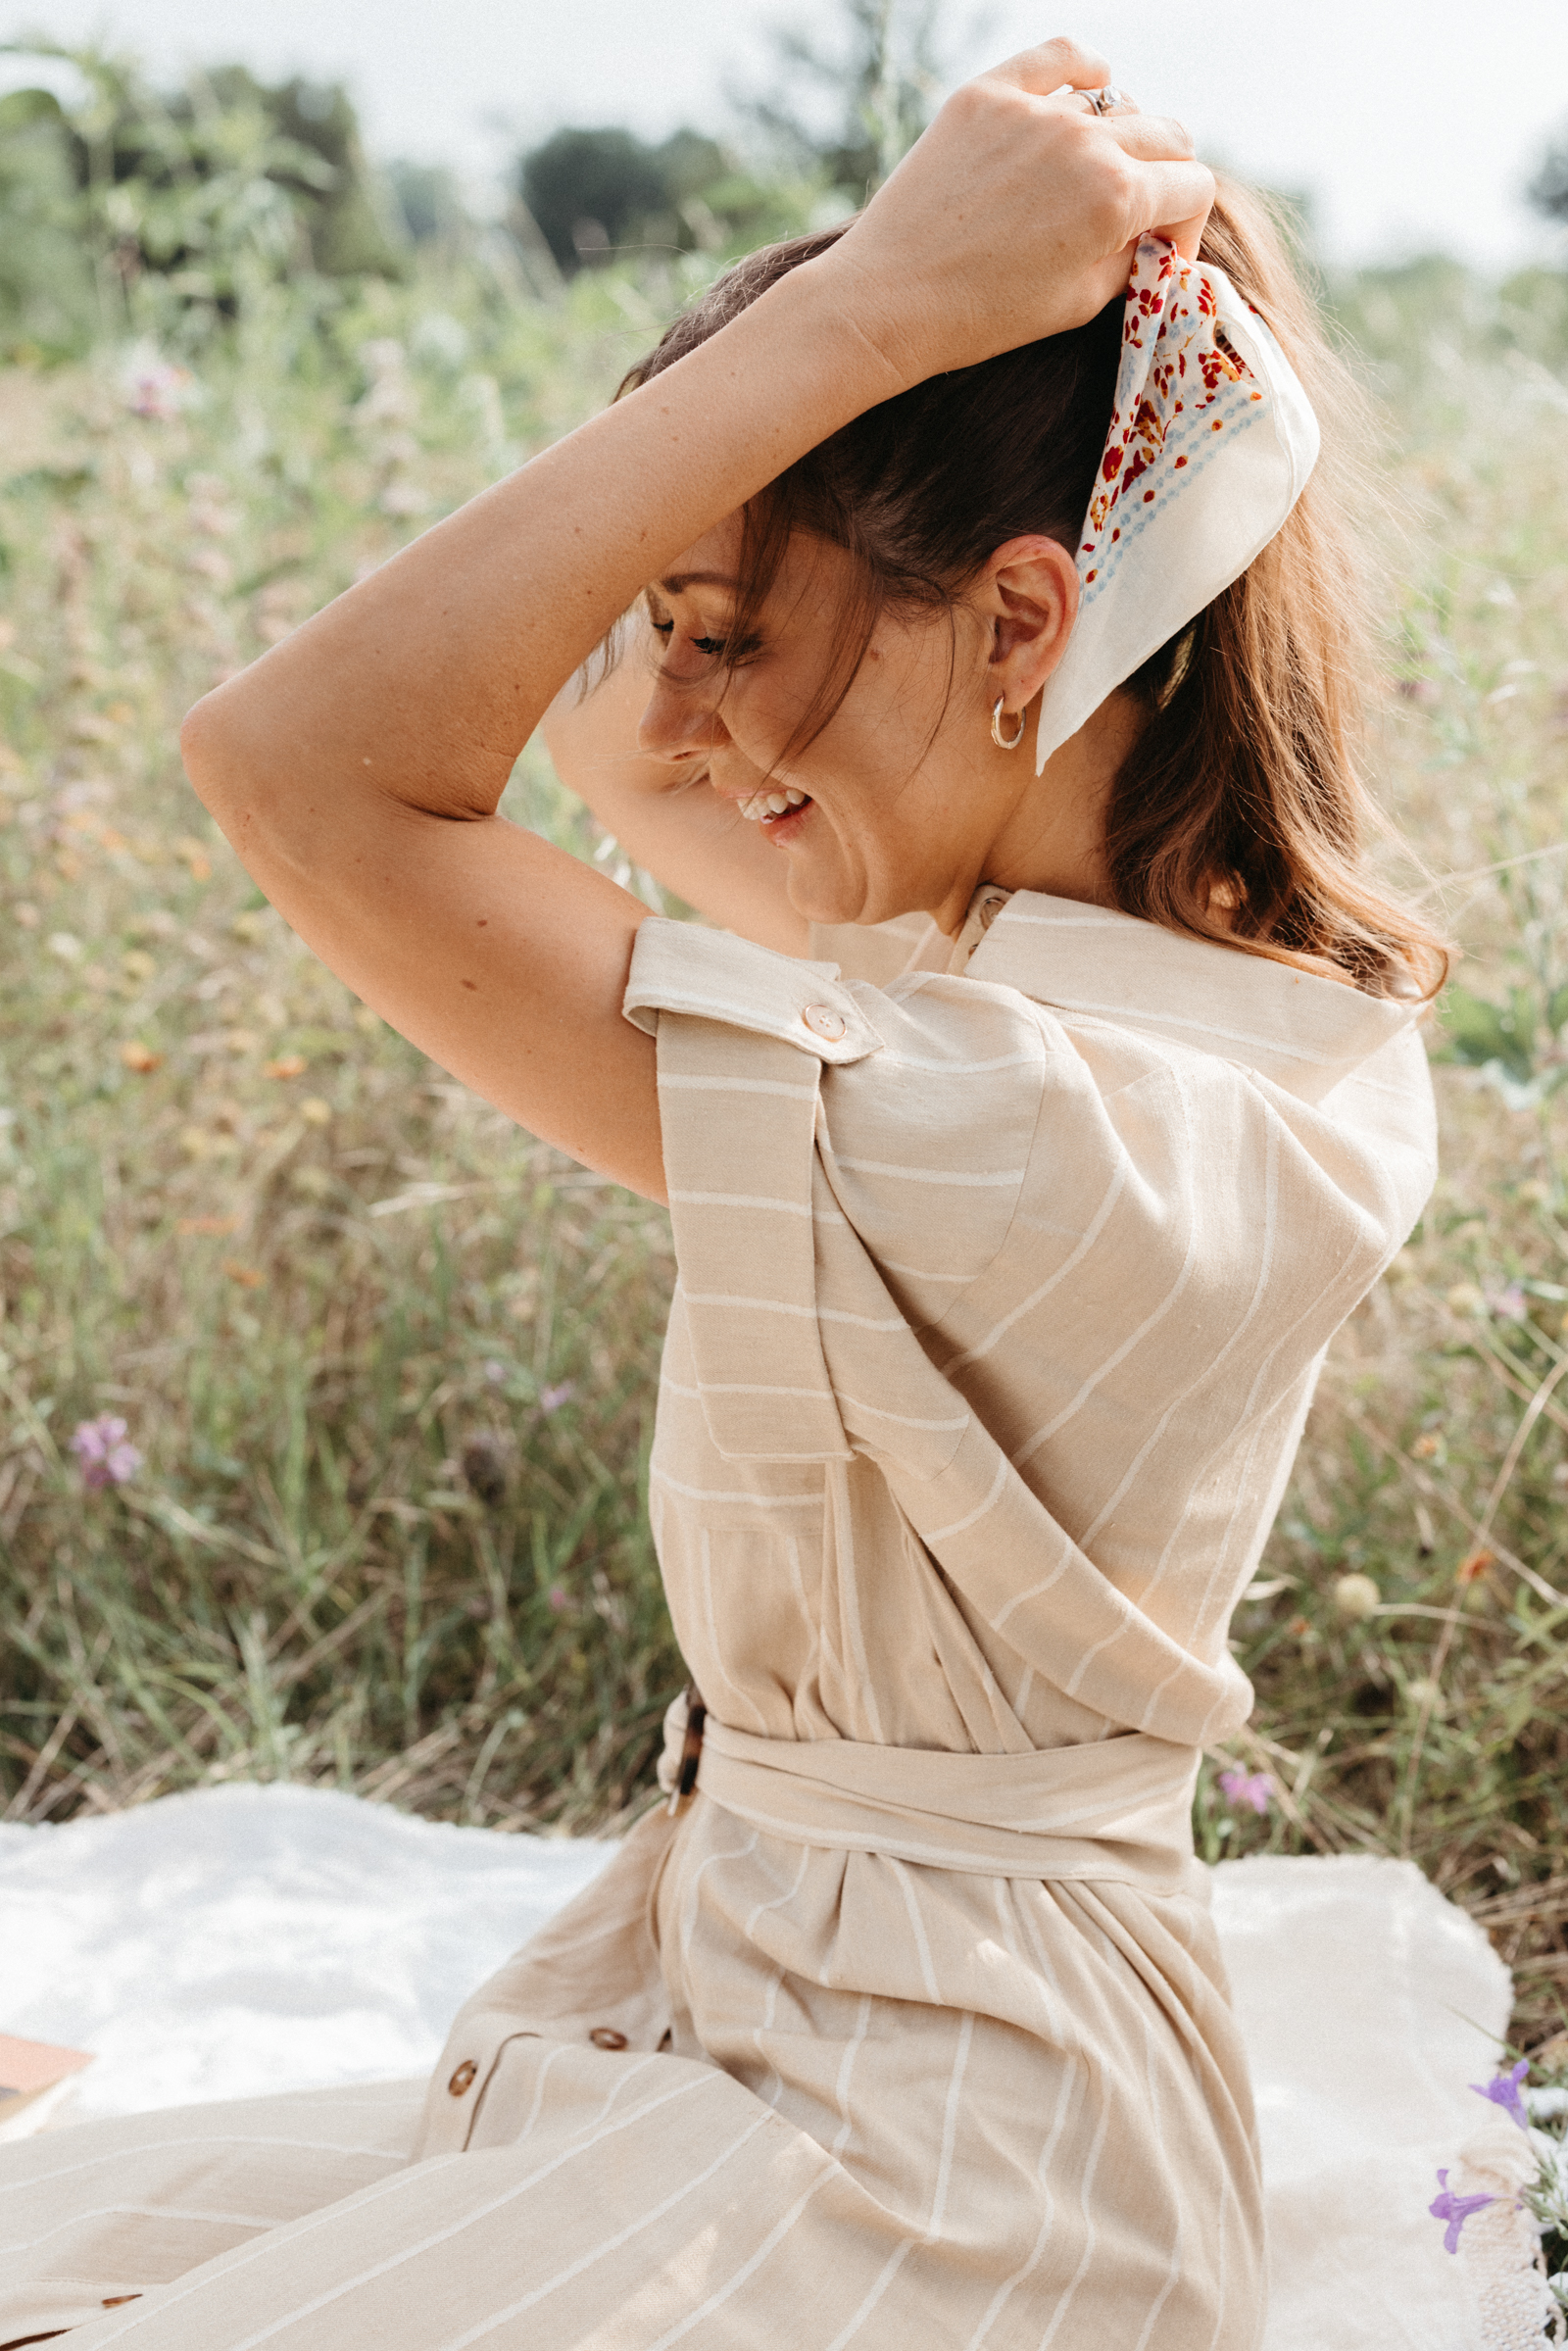 sezane neutral dress with scarf in hair